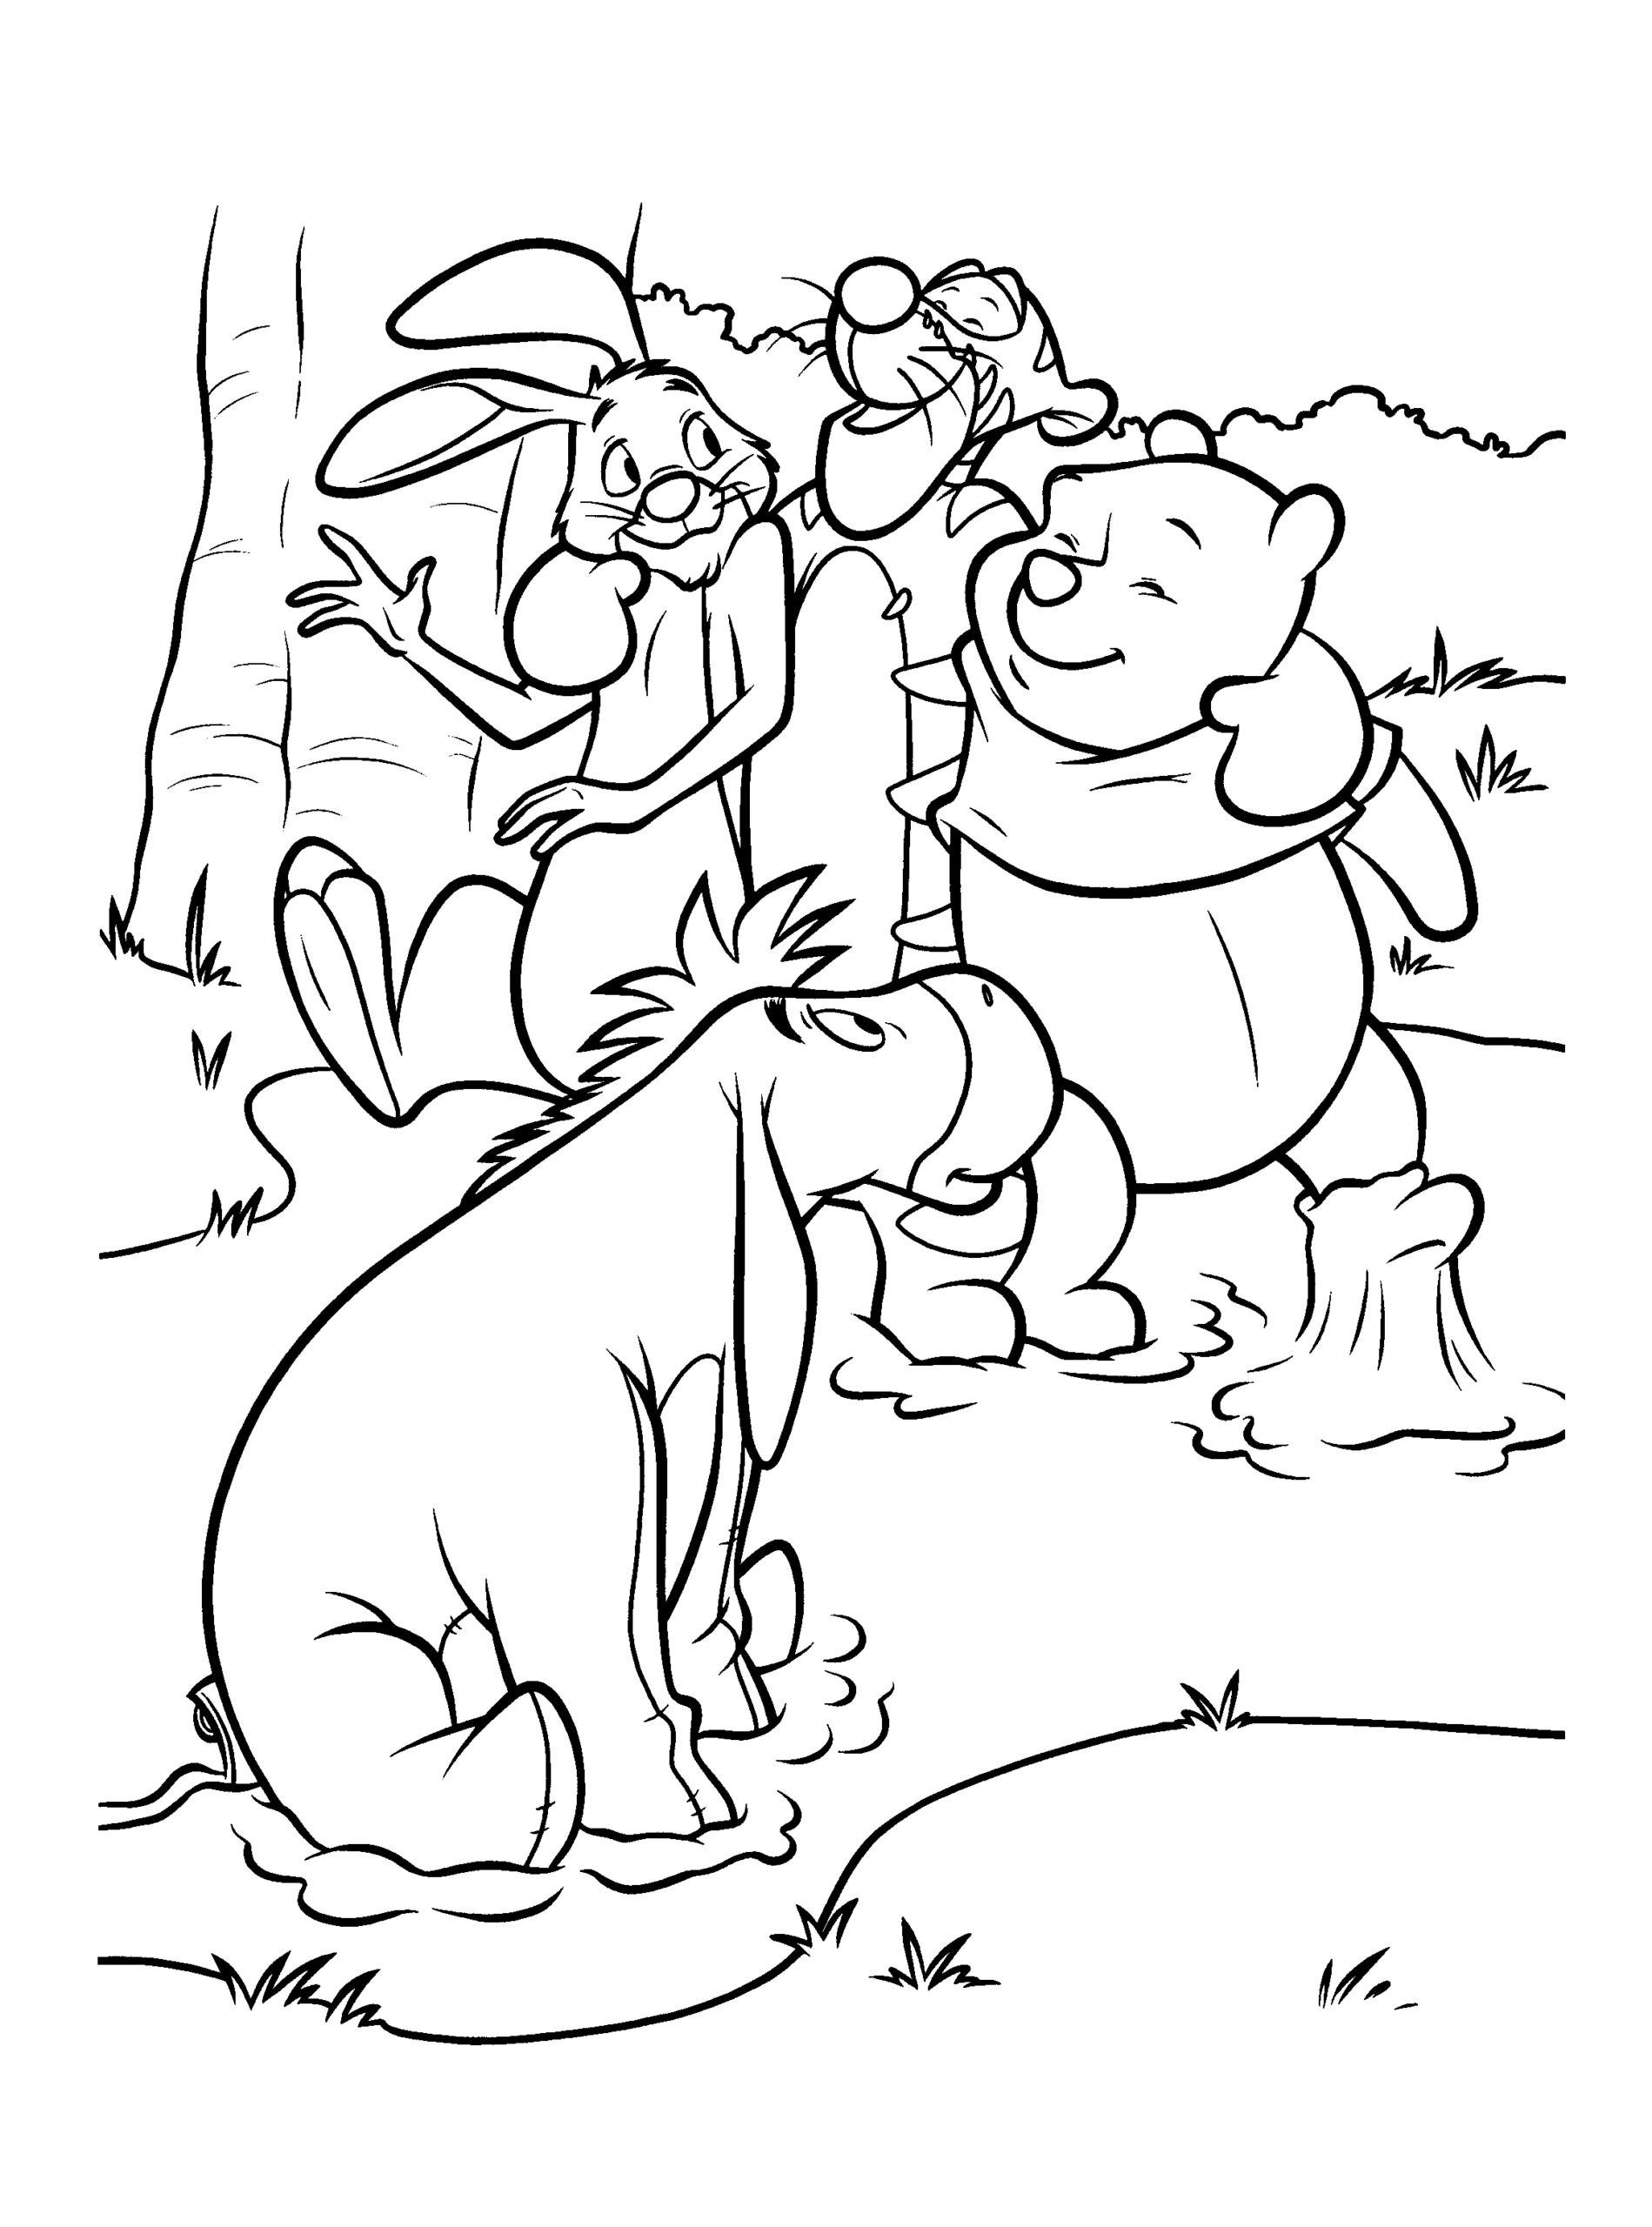 Winnie the Pooh Coloring Pages Cartoons winnie the pooh 28 Printable 2020 7129 Coloring4free